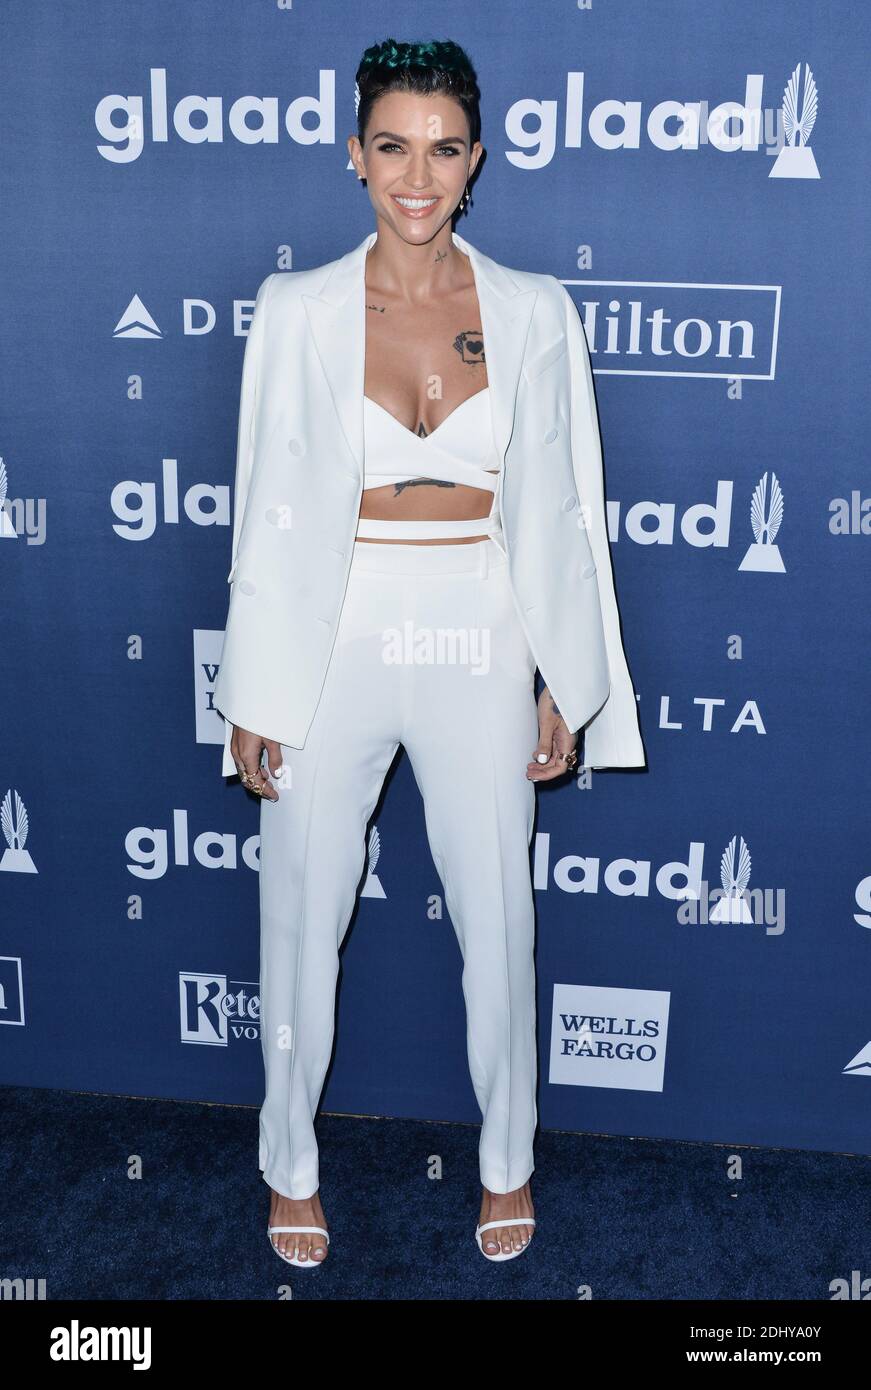 Ruby Rose attends the 27th Annual GLAAD Media Awards at the Beverly Hilton Hotel in Beverly Hills, Los Angeles, CA, USA on April 2, 2016. Photo by Lionel Hahn/ABACAUSA.COM Stock Photo